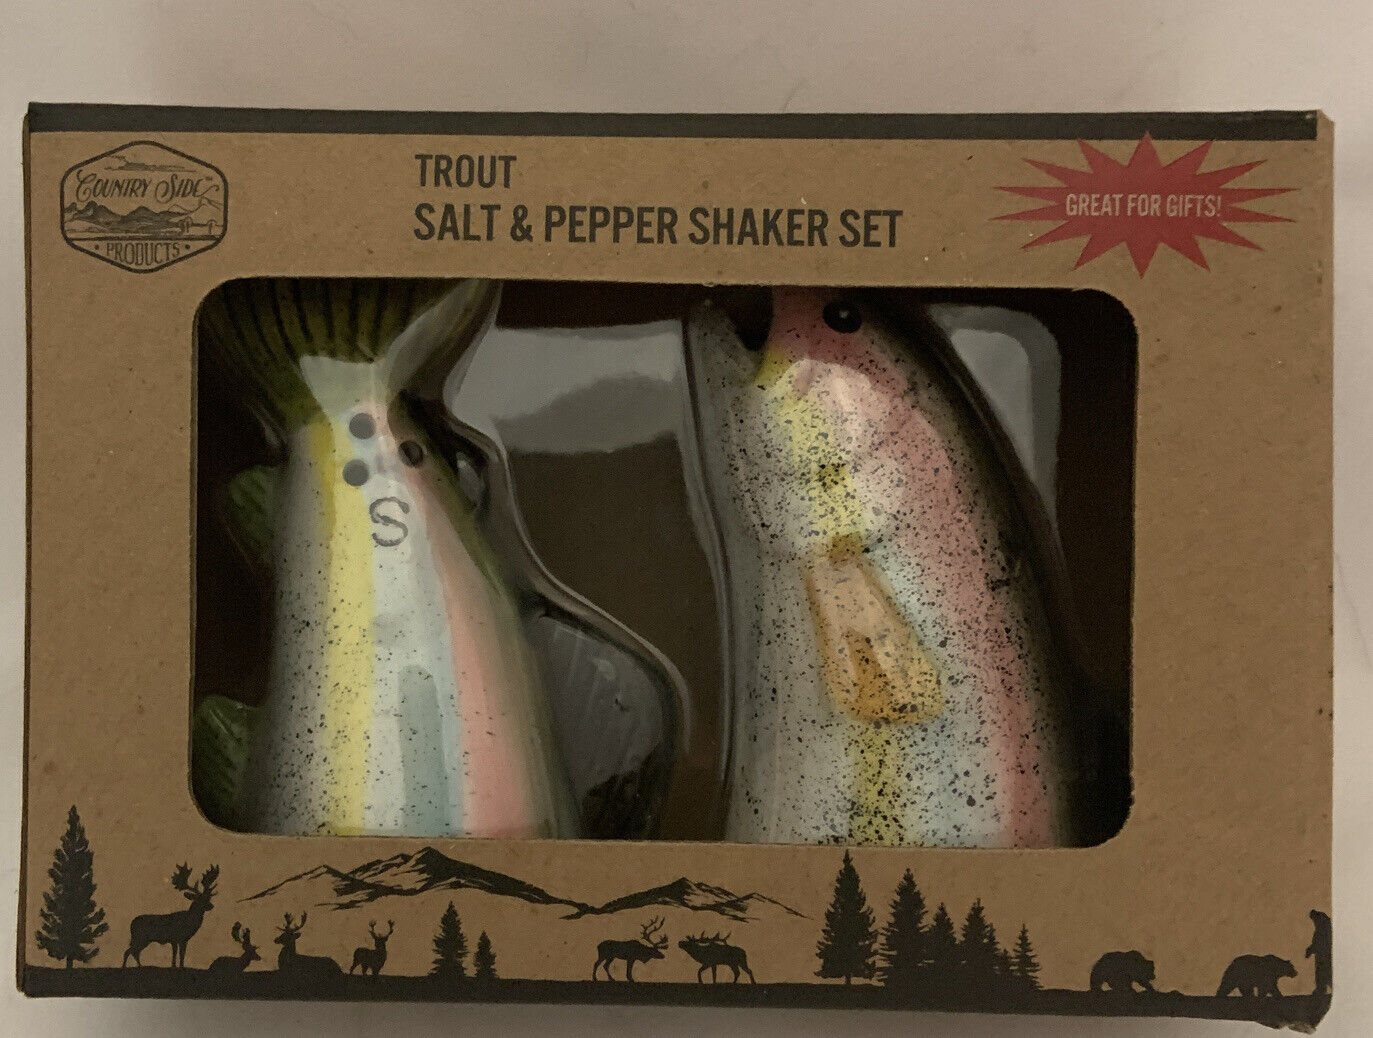 Trout or Bass Salt & Pepper Shaker Set by Country Side - NIB